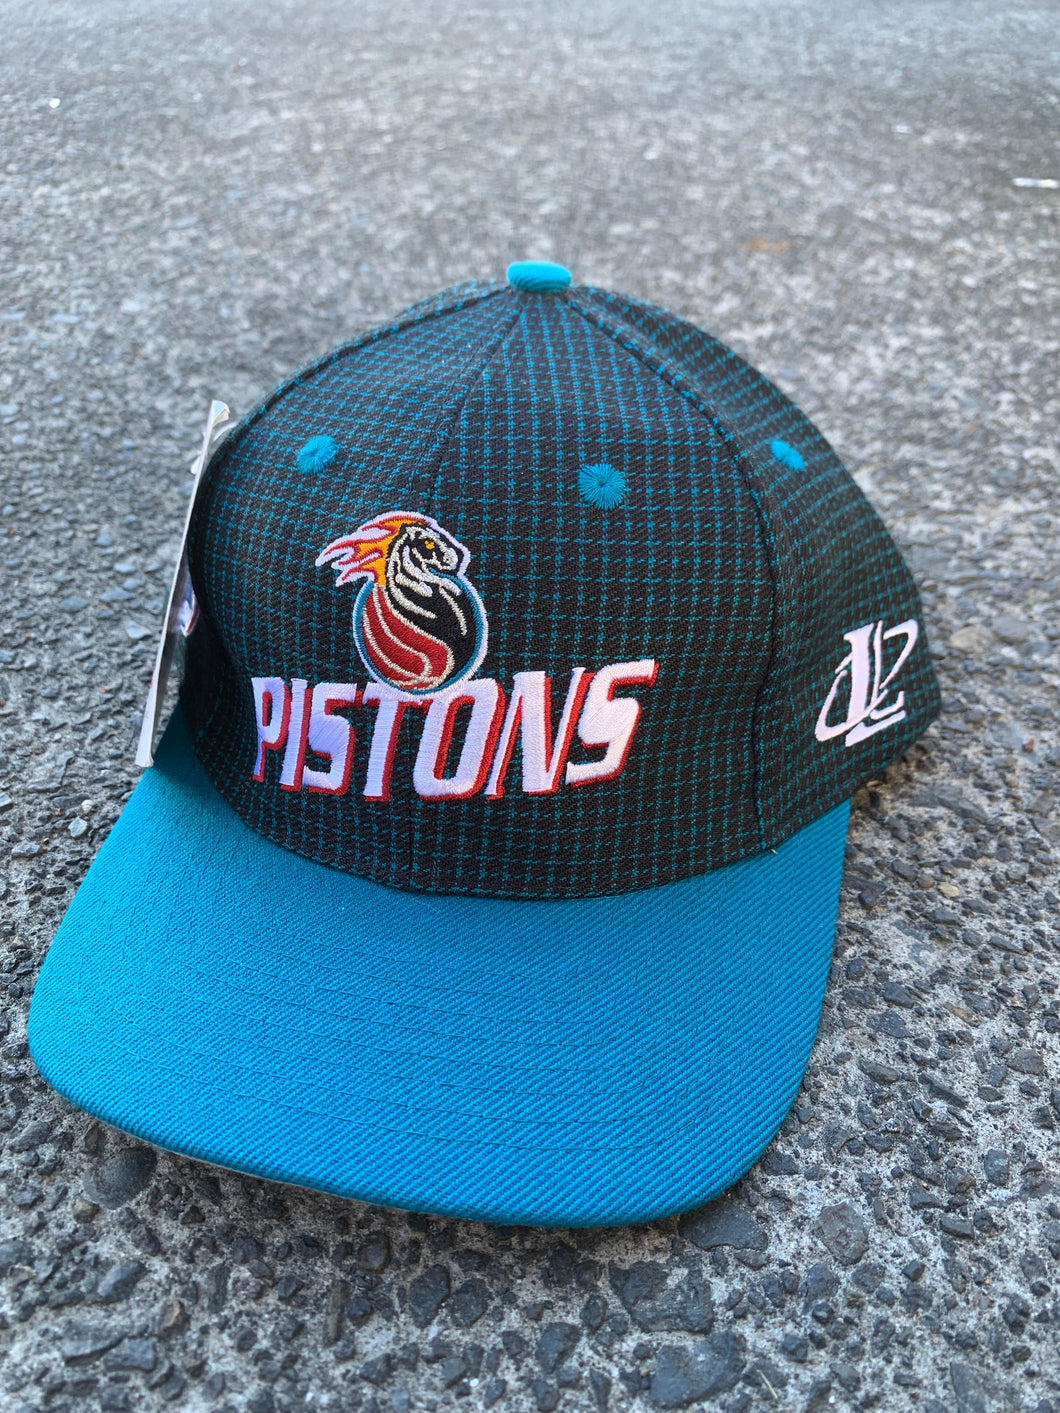 NBA - DETROIT PISTONS HAT SNAPBACK * NEW WITH TAGS * - OSFA